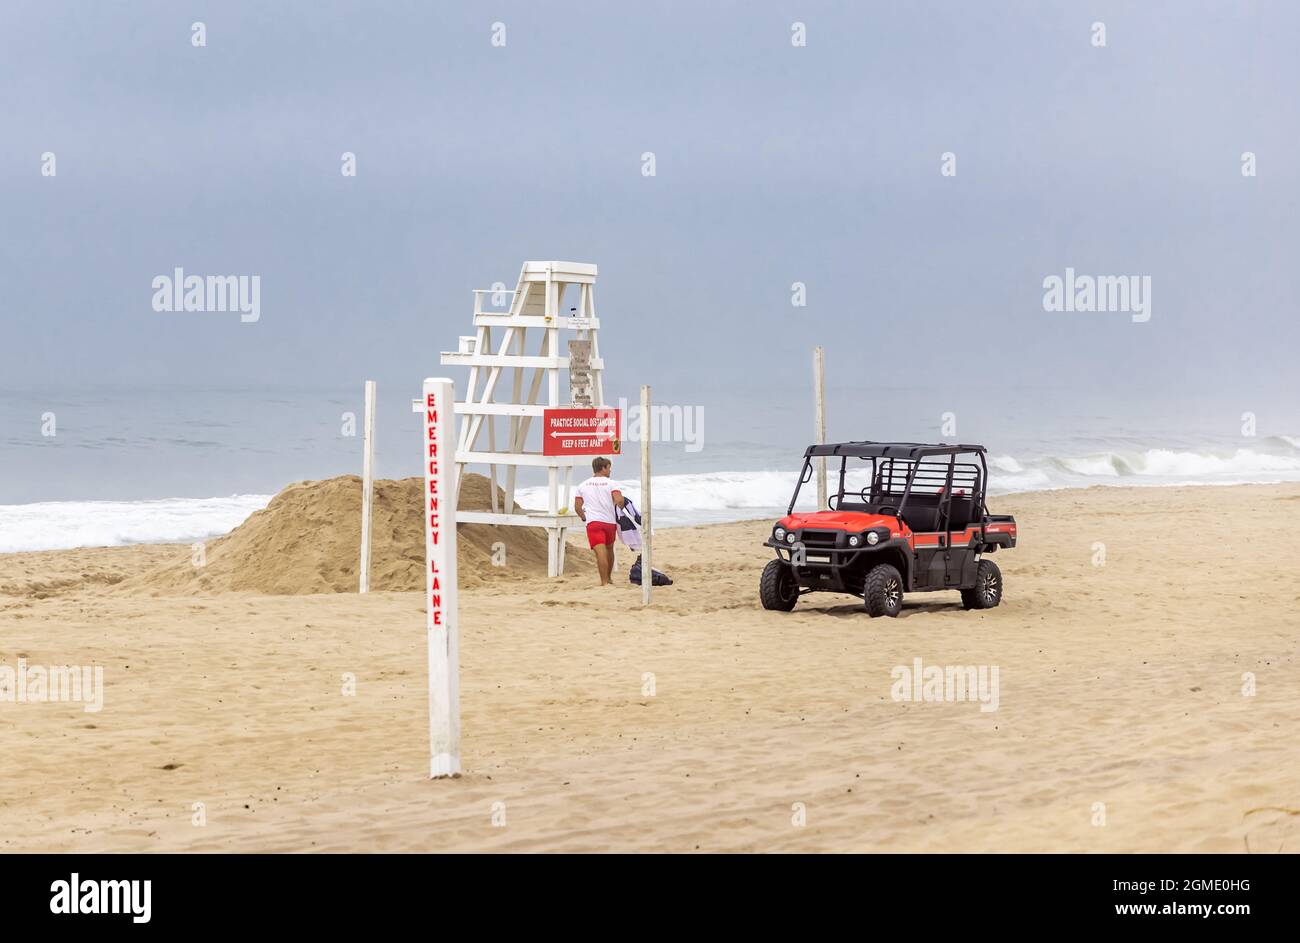 Life guard at an Amagansett Life guard stand in Eastern Long Island, NY Stock Photo